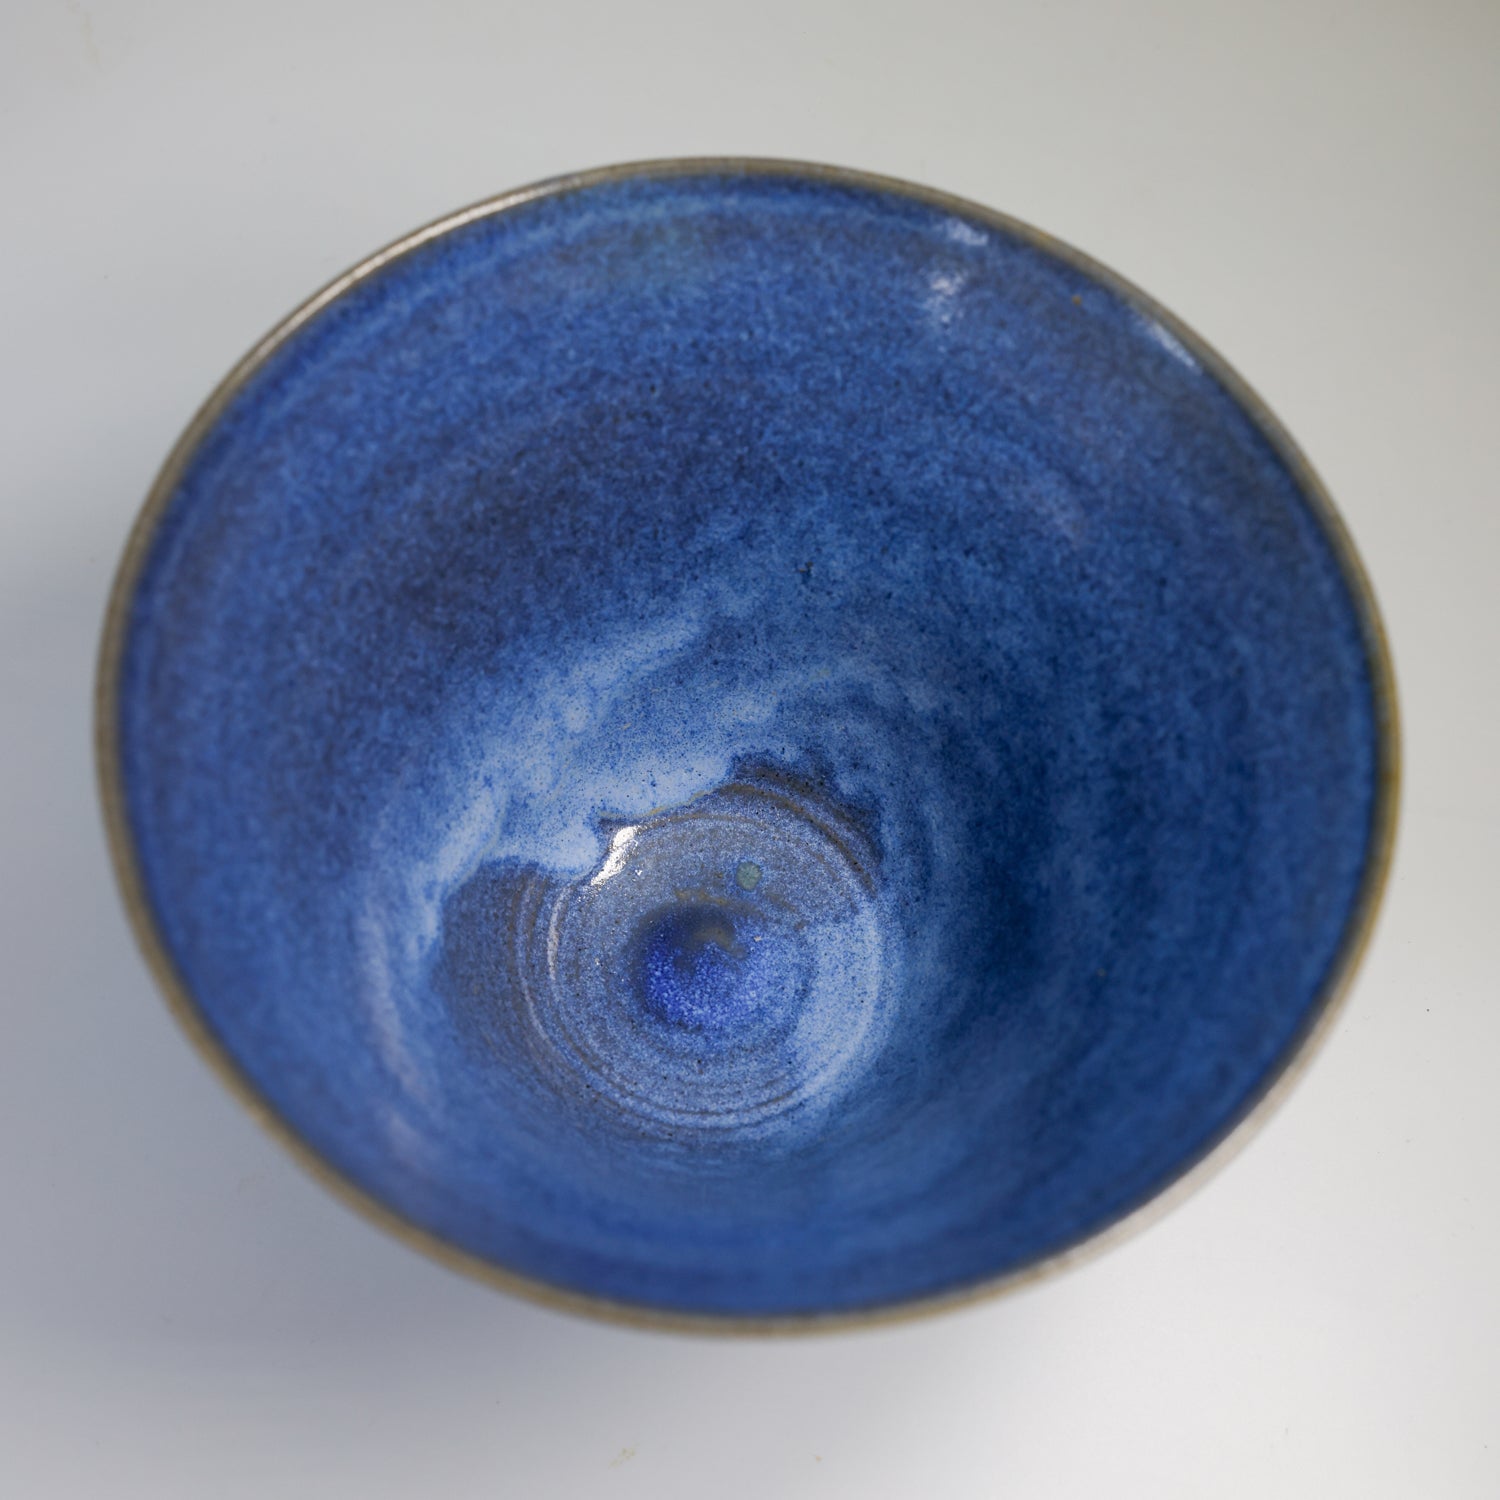 Conical serving bowl